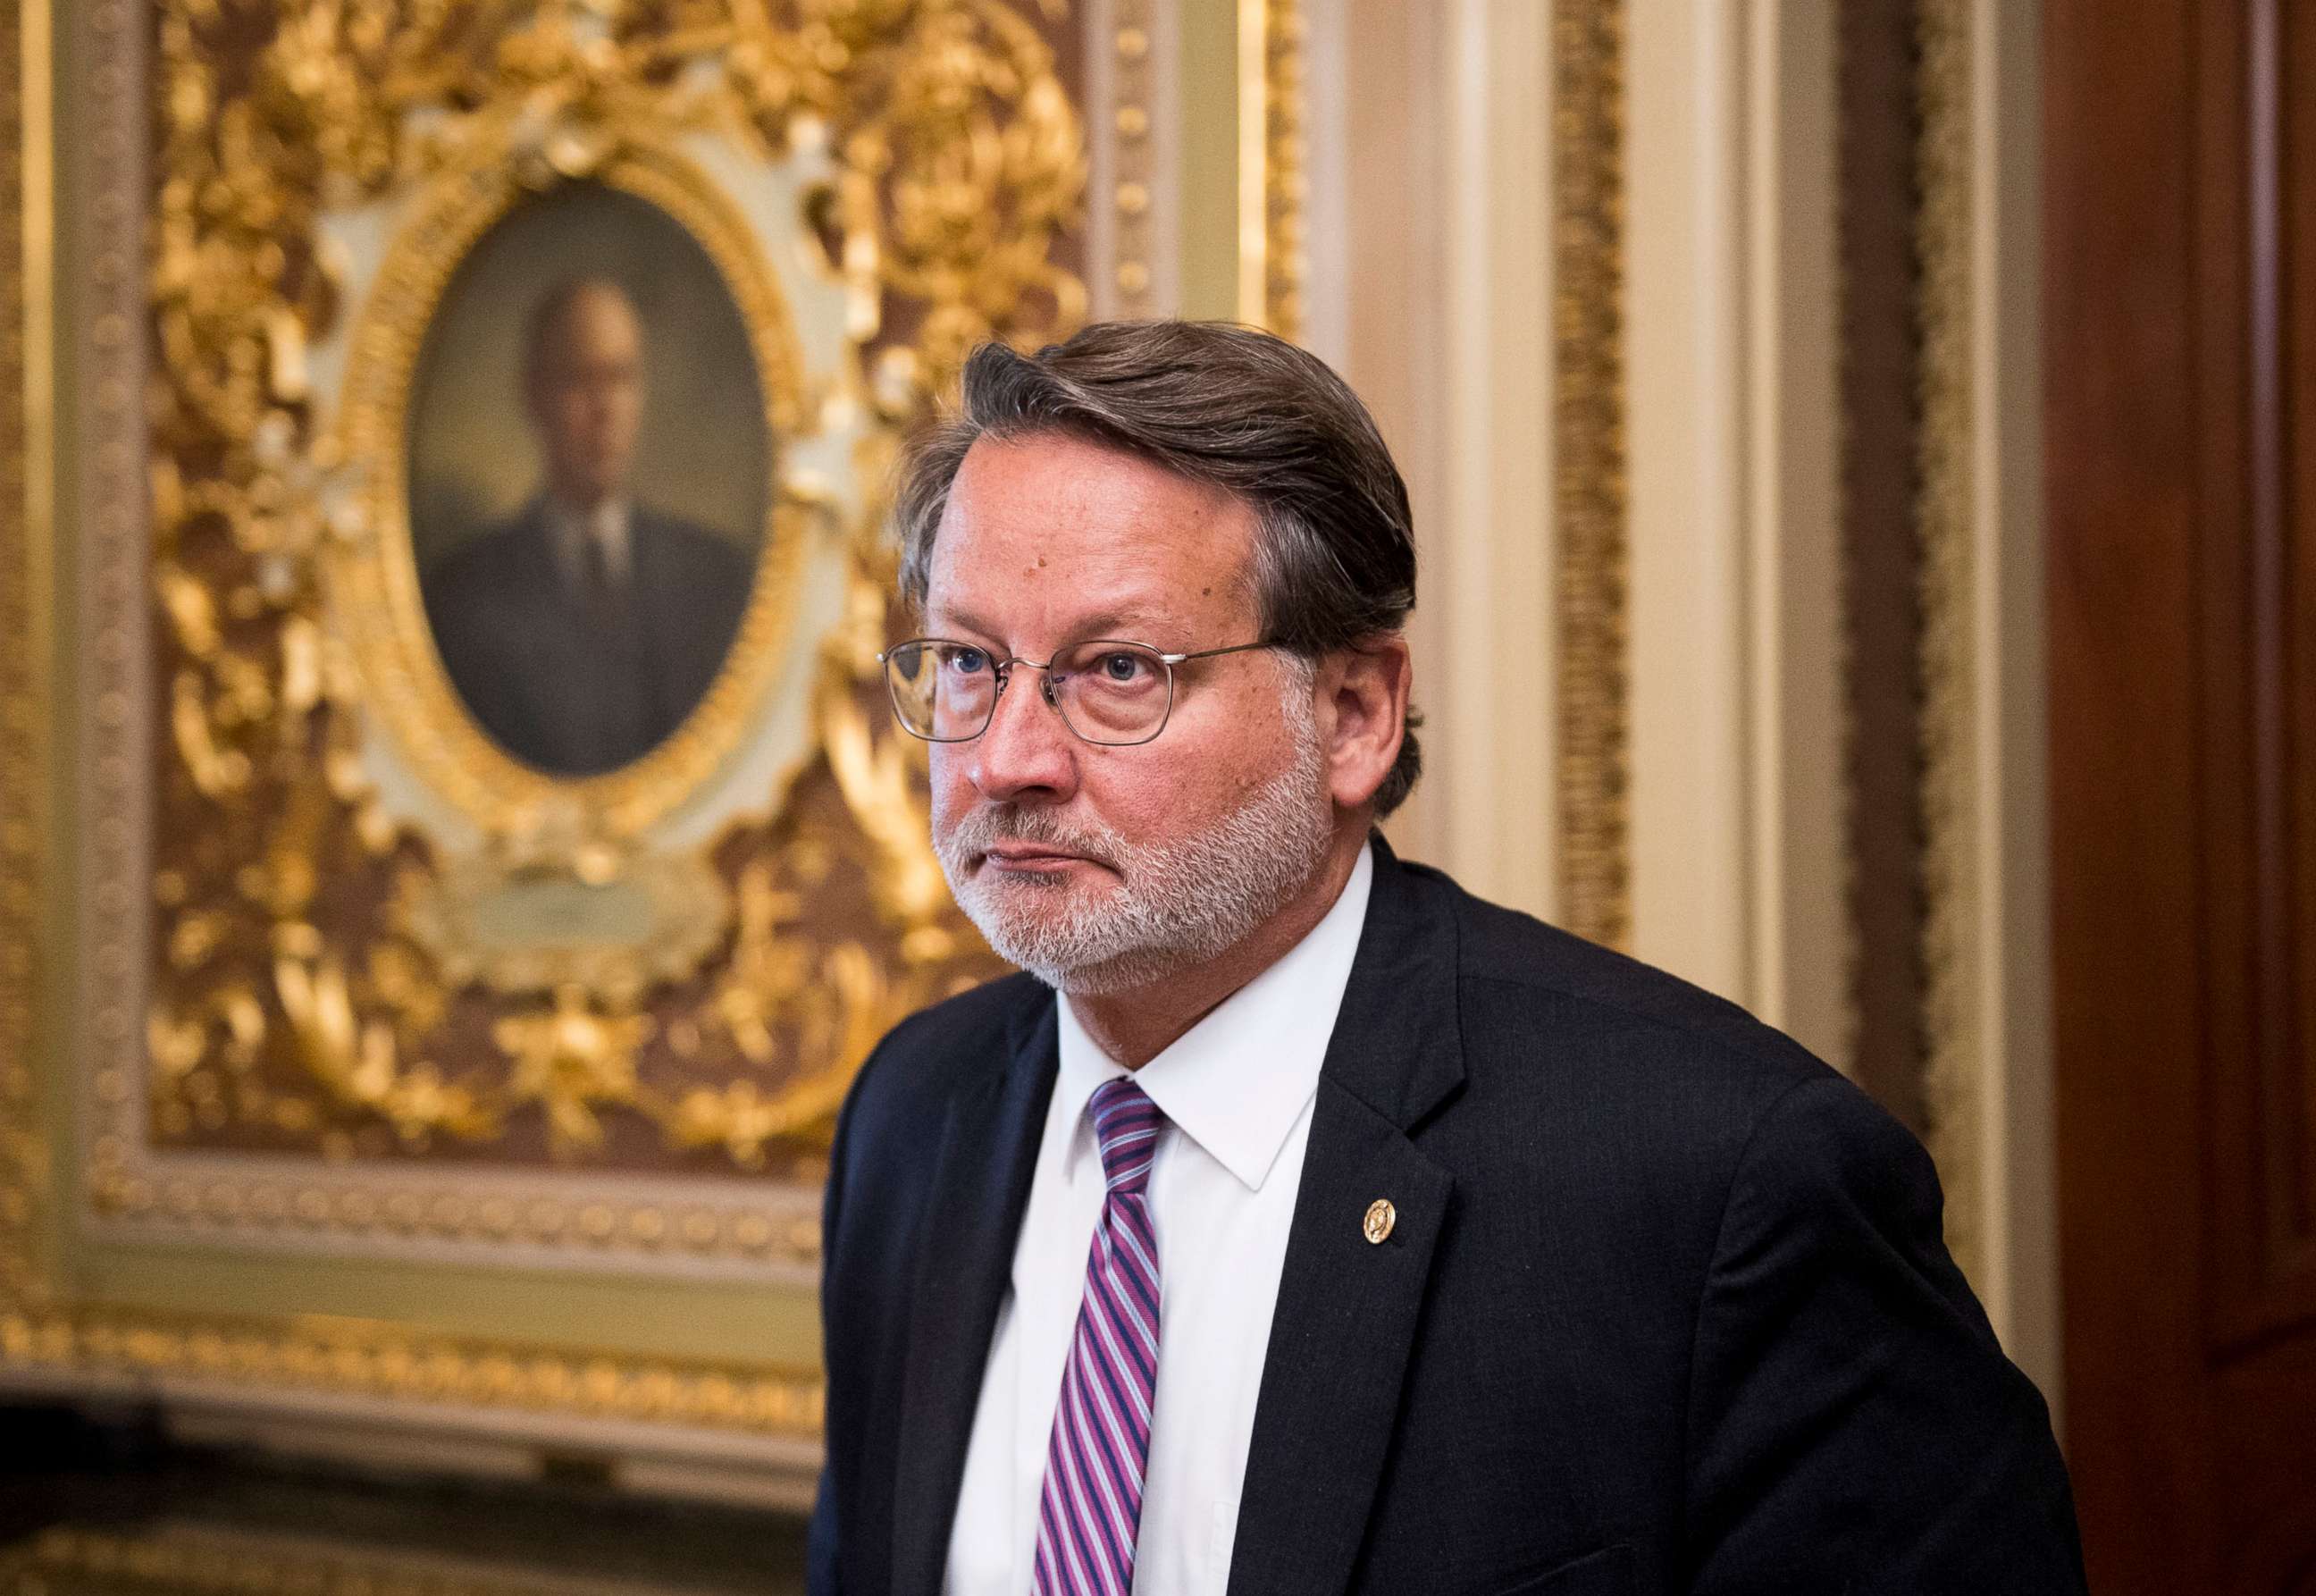 PHOTO: Sen. Gary Peters leaves the Senate Democrats' policy lunch in the Capitol on Sept. 10, 2019.